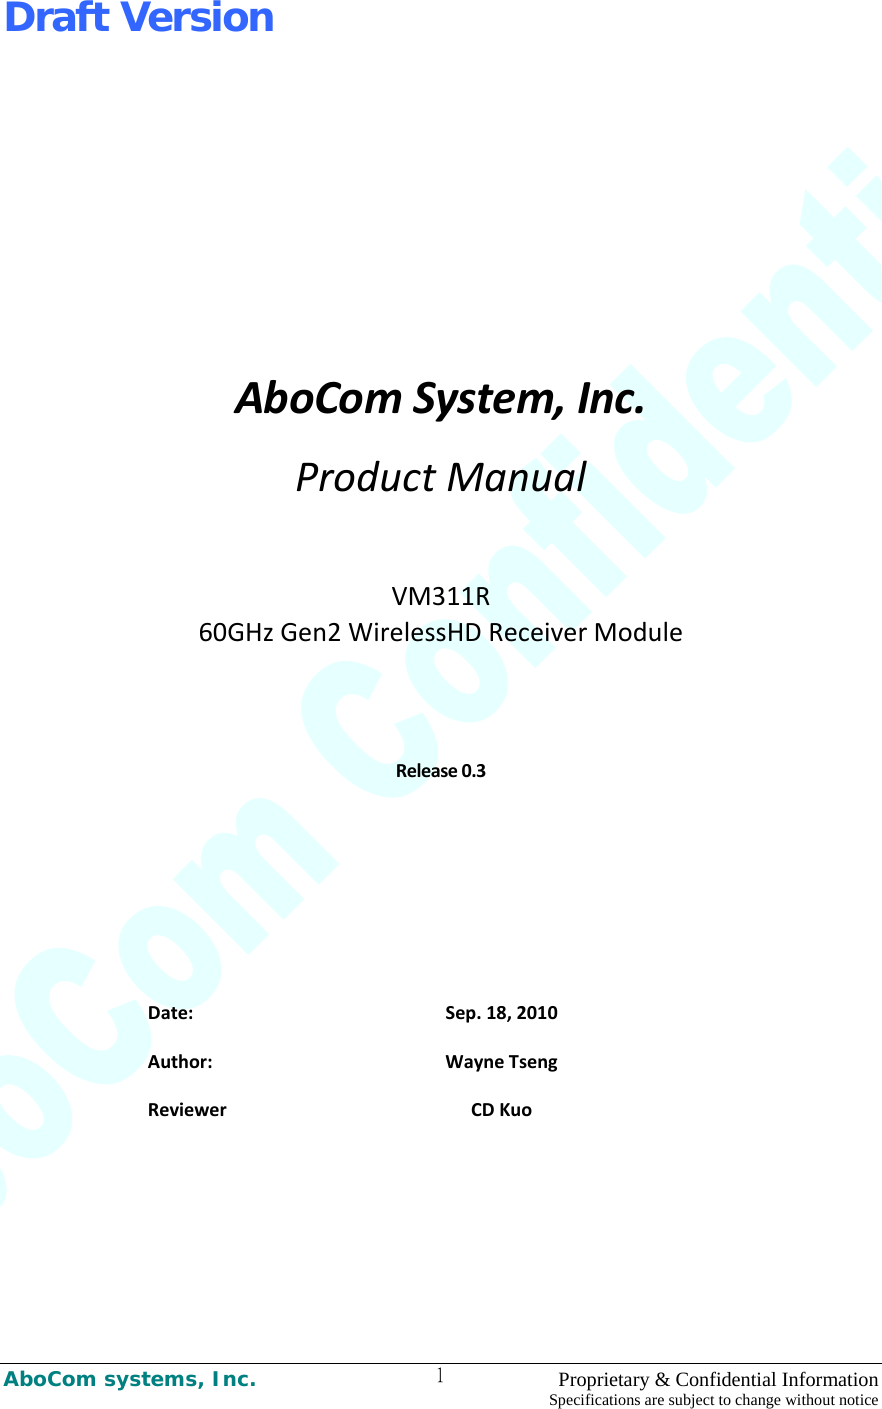 Draft Version AboCom systems, Inc.    Proprietary &amp; Confidential Information Specifications are subject to change without notice 1AboComSystem,Inc.ProductManualVM311R60GHzGen2WirelessHDReceiverModuleRelease0.3Date:Sep.18,2010Author:WayneTsengReviewerCDKuo